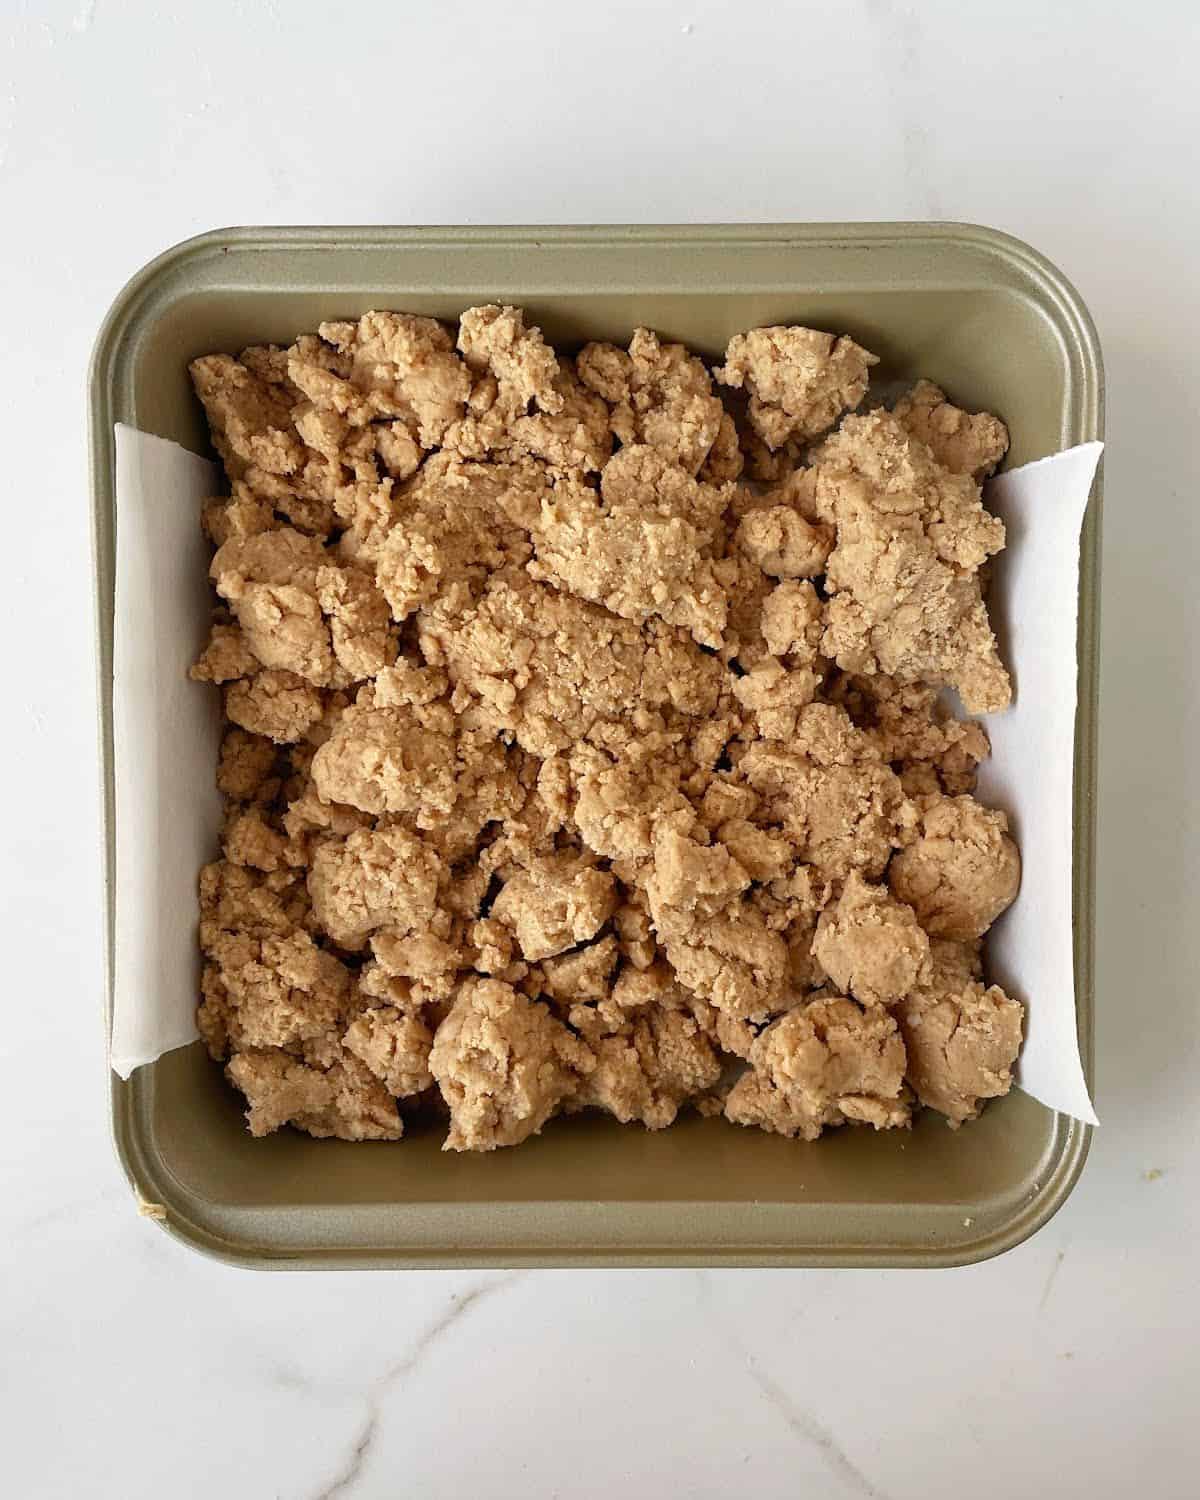 Crumbly peanut butter mixture in a gold colored square pan with parchment paper on a white surface.